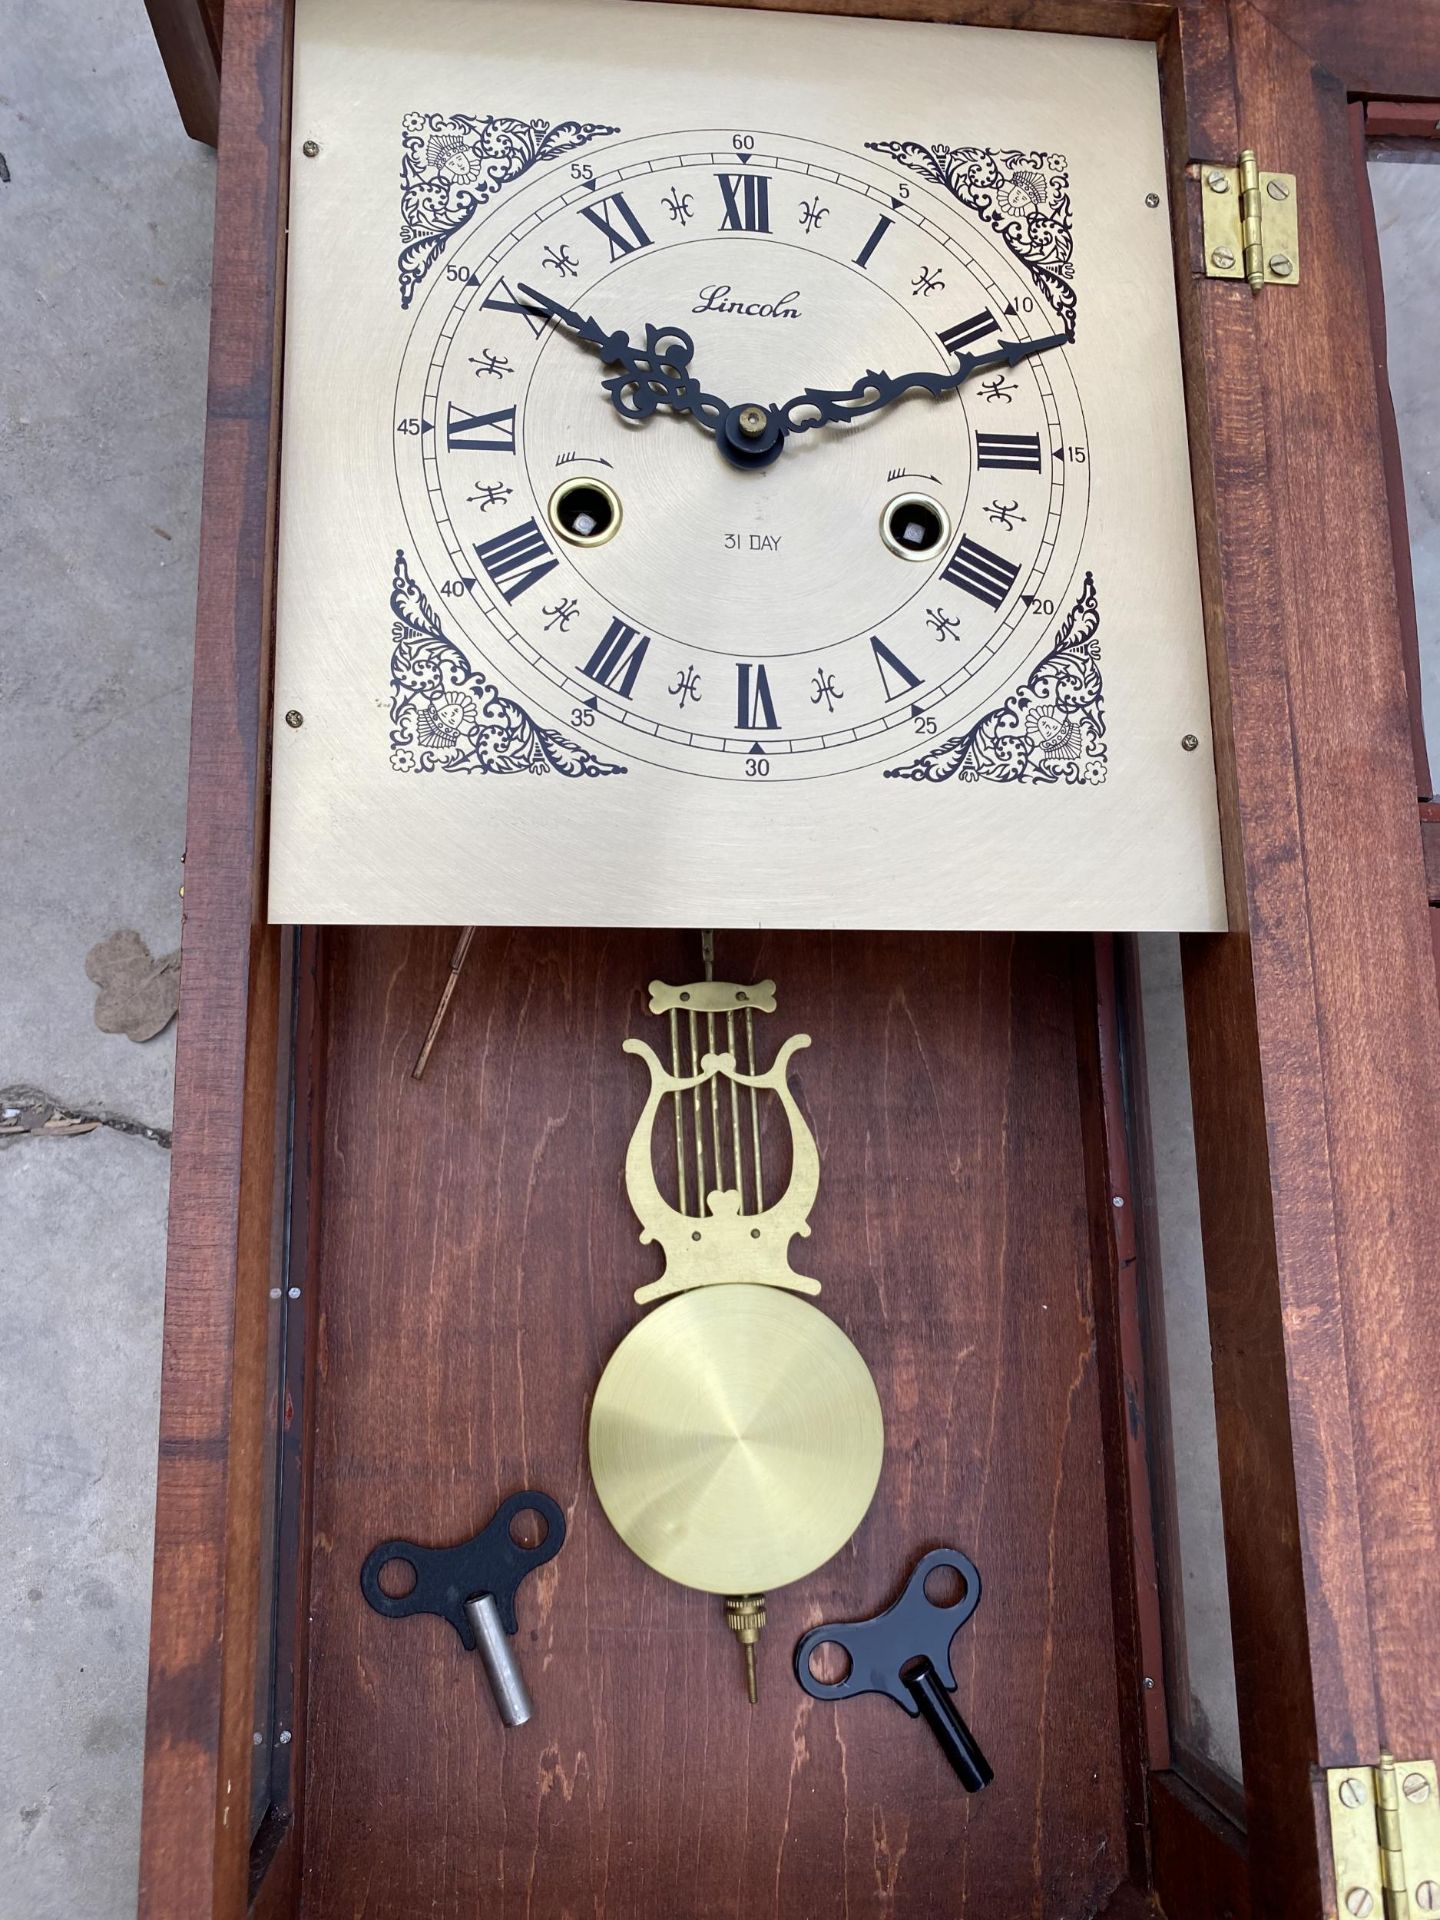 A LINCOLN 31 DAY MECHANICAL WALL CLOCK - Image 3 of 5